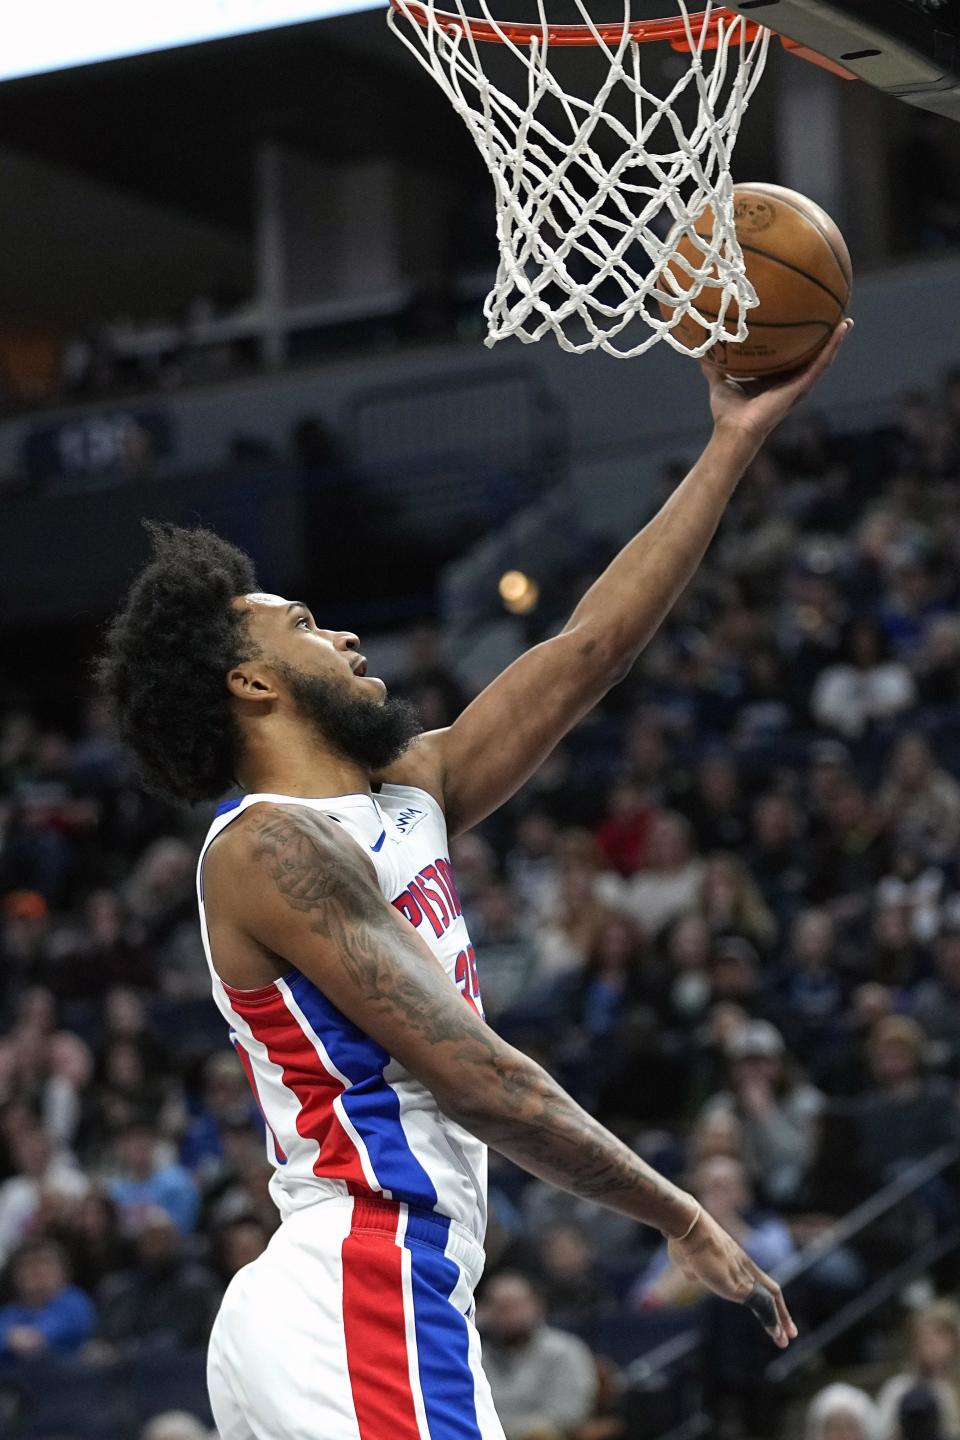 Pistons forward Marvin Bagley III shoots during the first half on Saturday, Dec. 31, 2022, in Minneapolis.